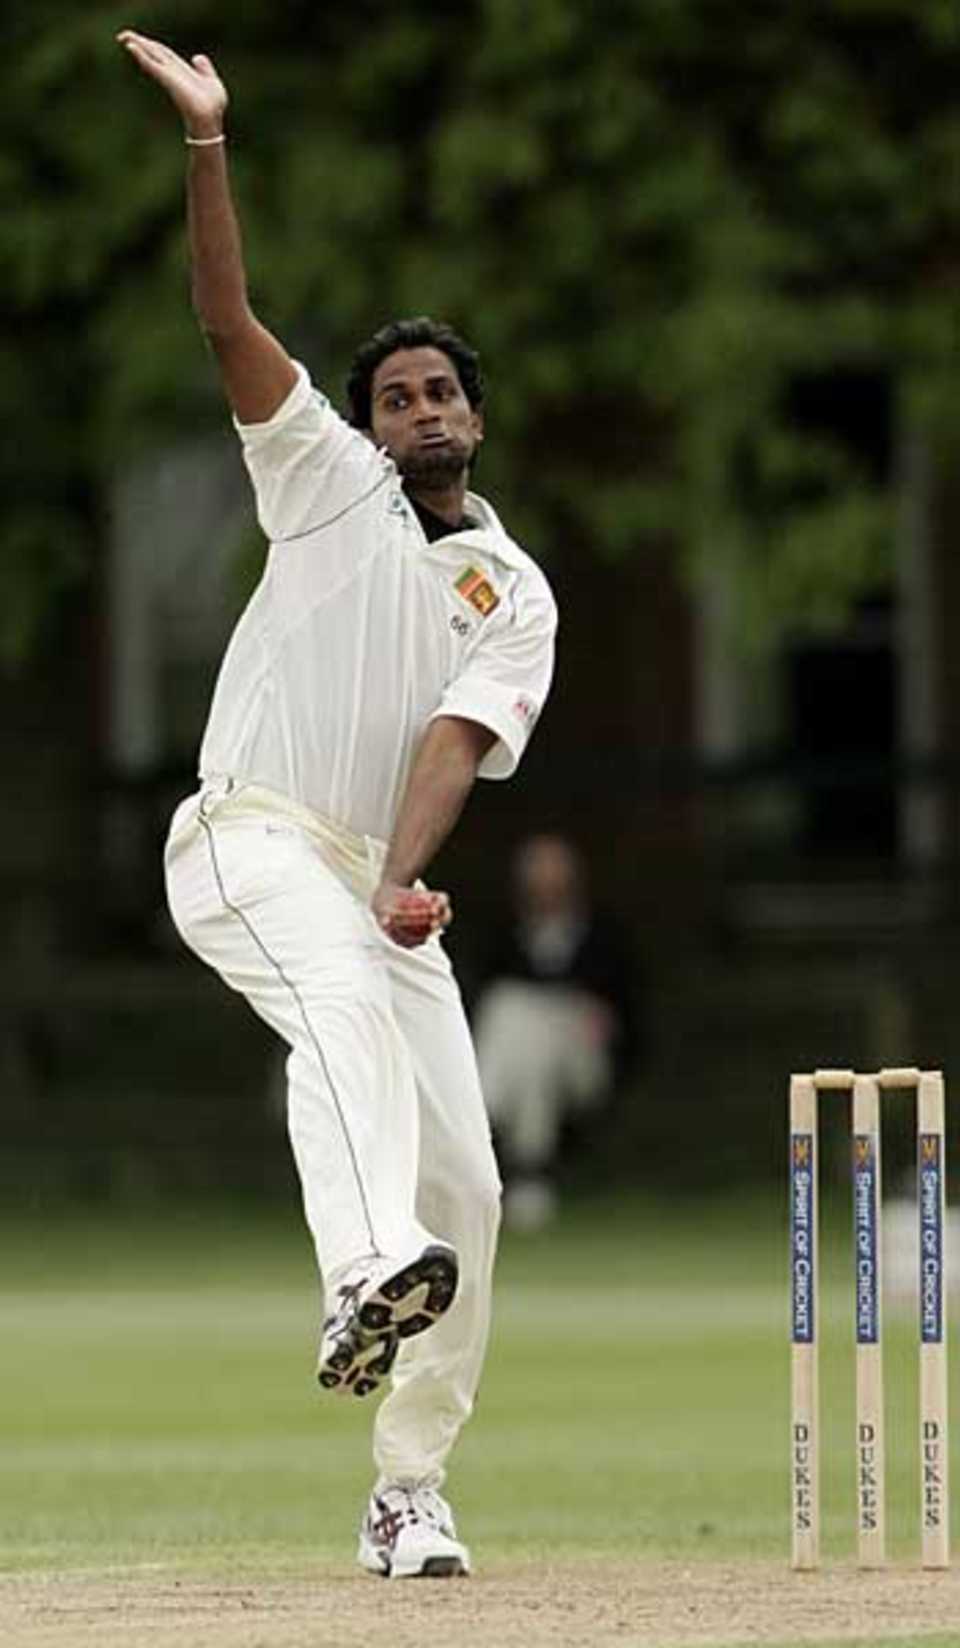 Nuwan Zoysa in his delivery stride, British Universities v Sri Lankans, Tour match, Fenner's, April 26, 2006